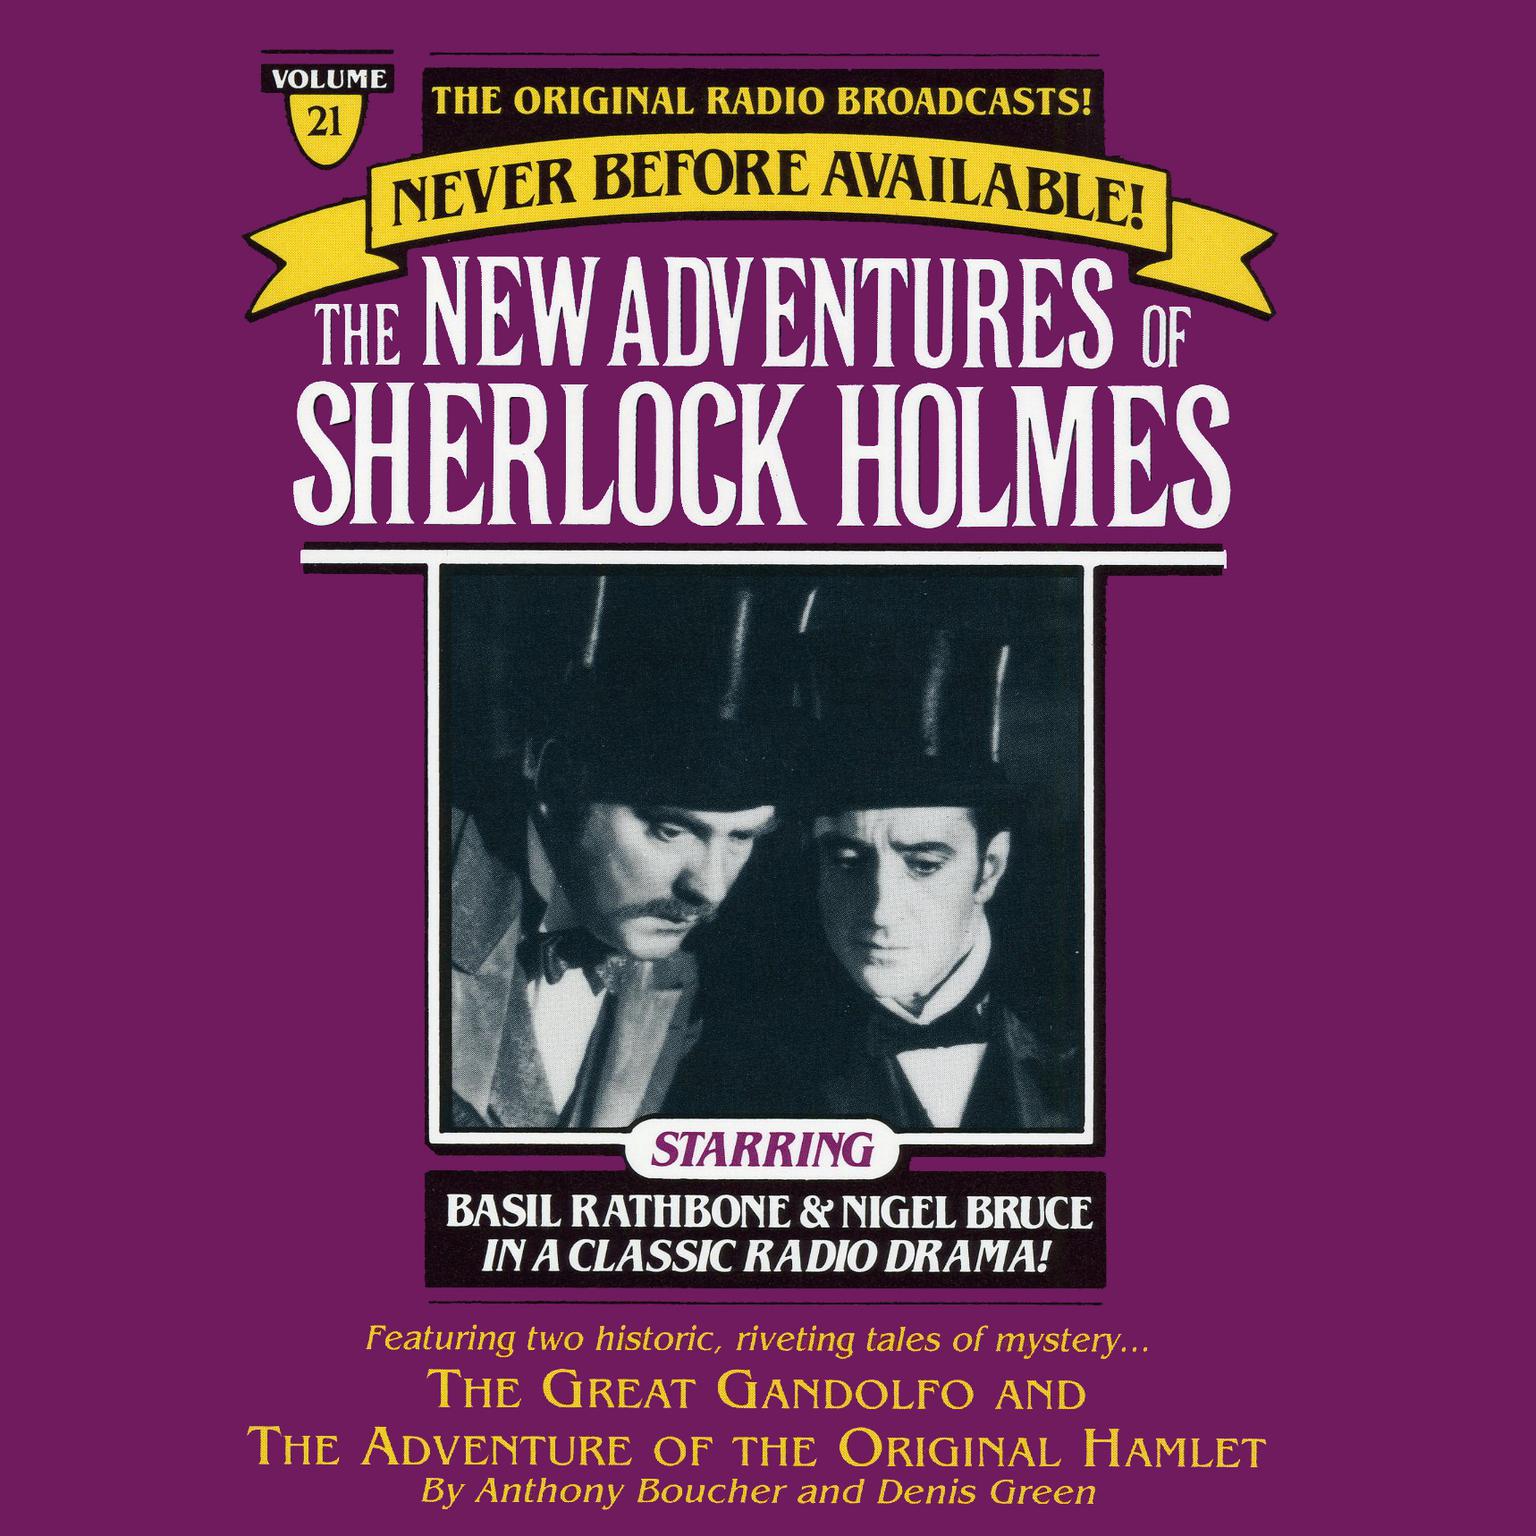 The Great Gondolofo and The Adventure of the Original Hamlet (Abridged): The New Adventures of Sherlock Holmes, Episode 21 Audiobook, by Anthony Boucher